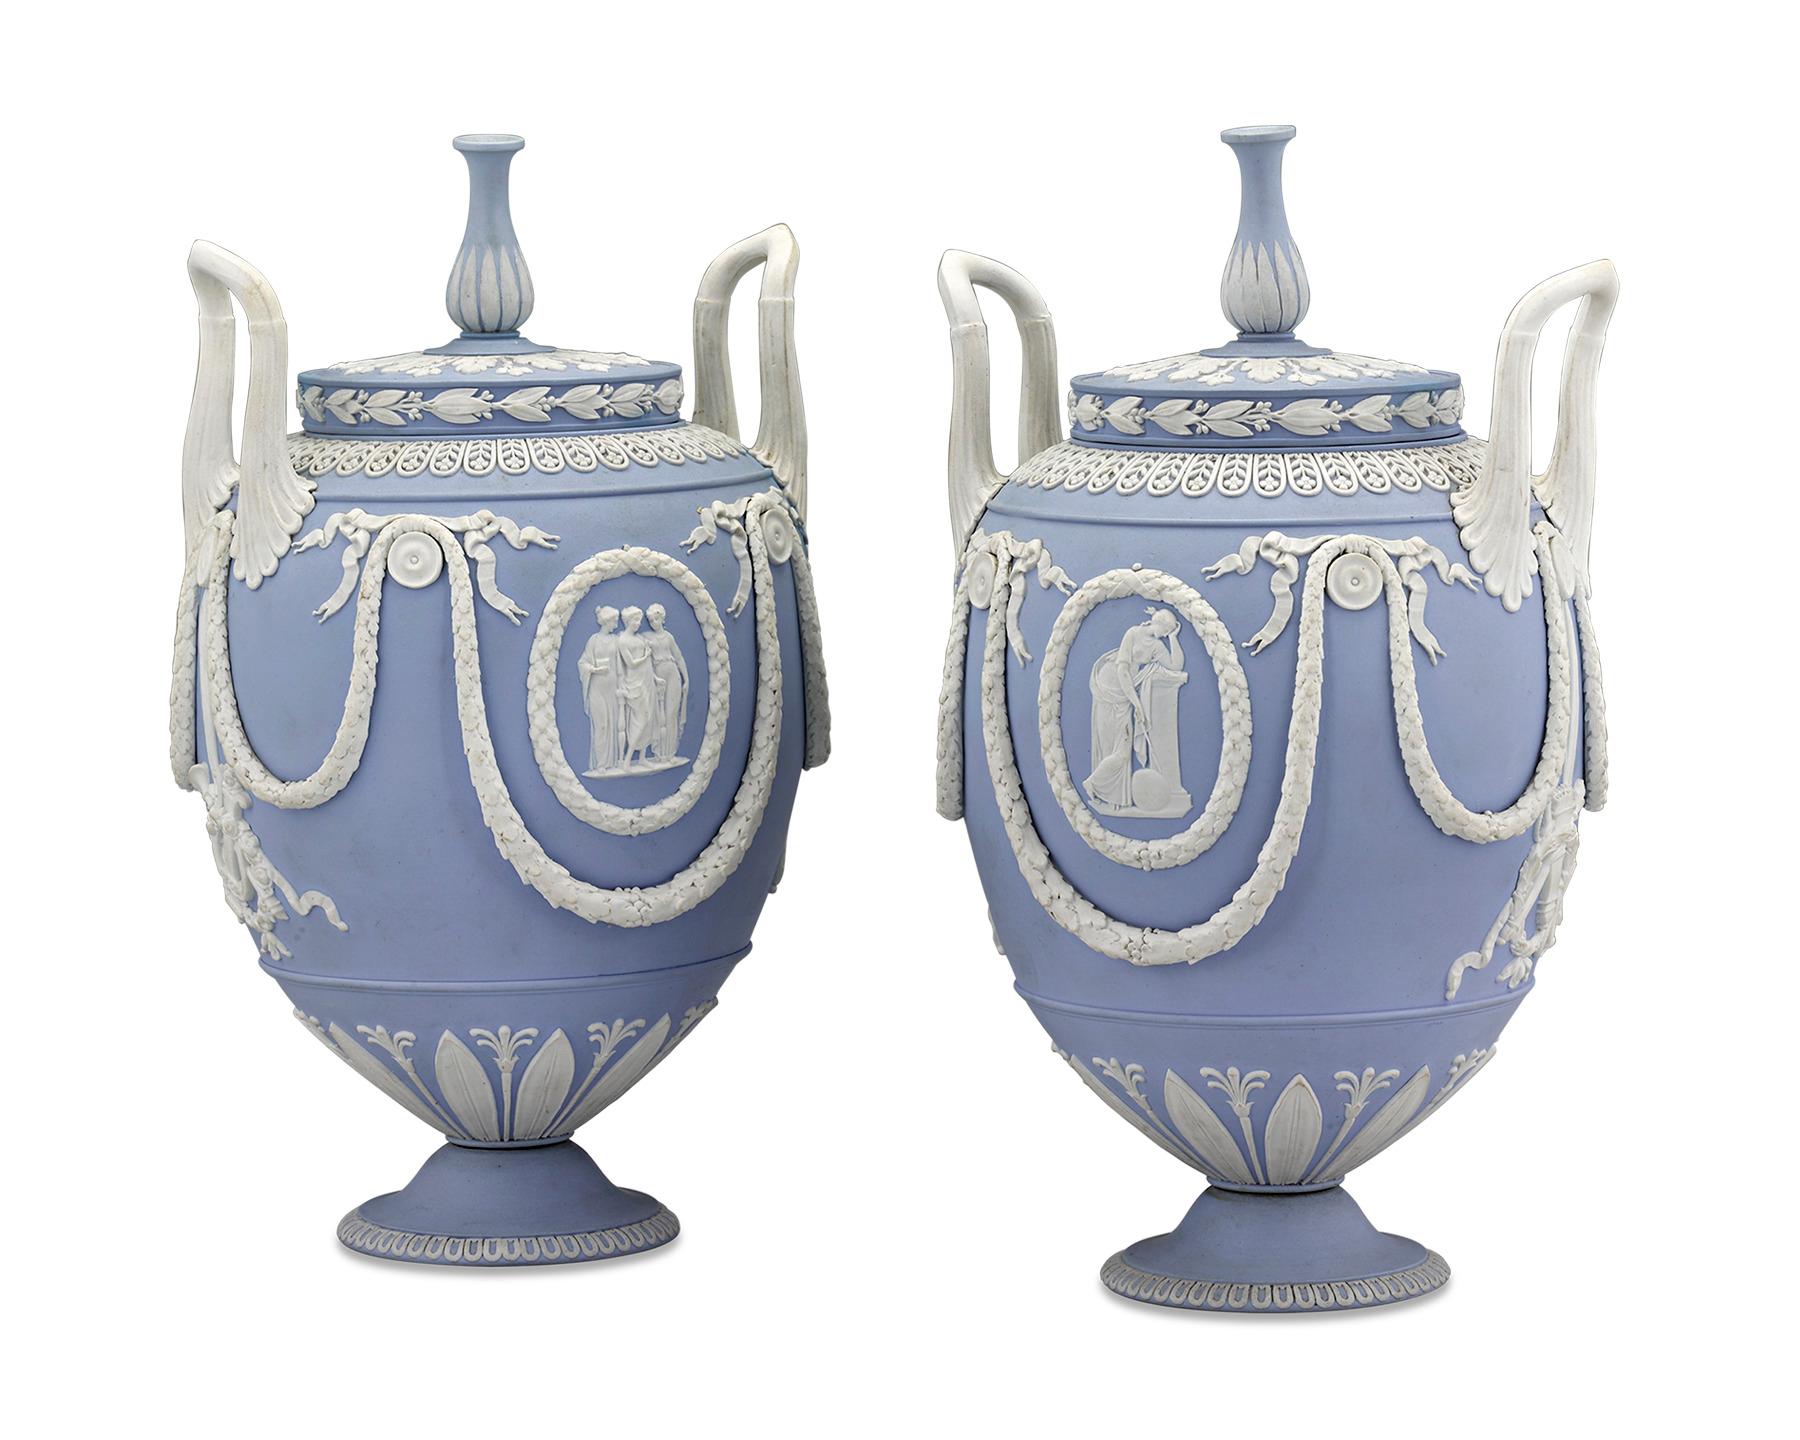 This rare and beautiful pair of urns were crafted by Wedgwood in the firm’s famous pale “Wedgwood blue” jasperware so prized by collectors and connoisseurs alike. Bearing a shape recalling Ancient Greek pottery, neoclassical scenes of maidens